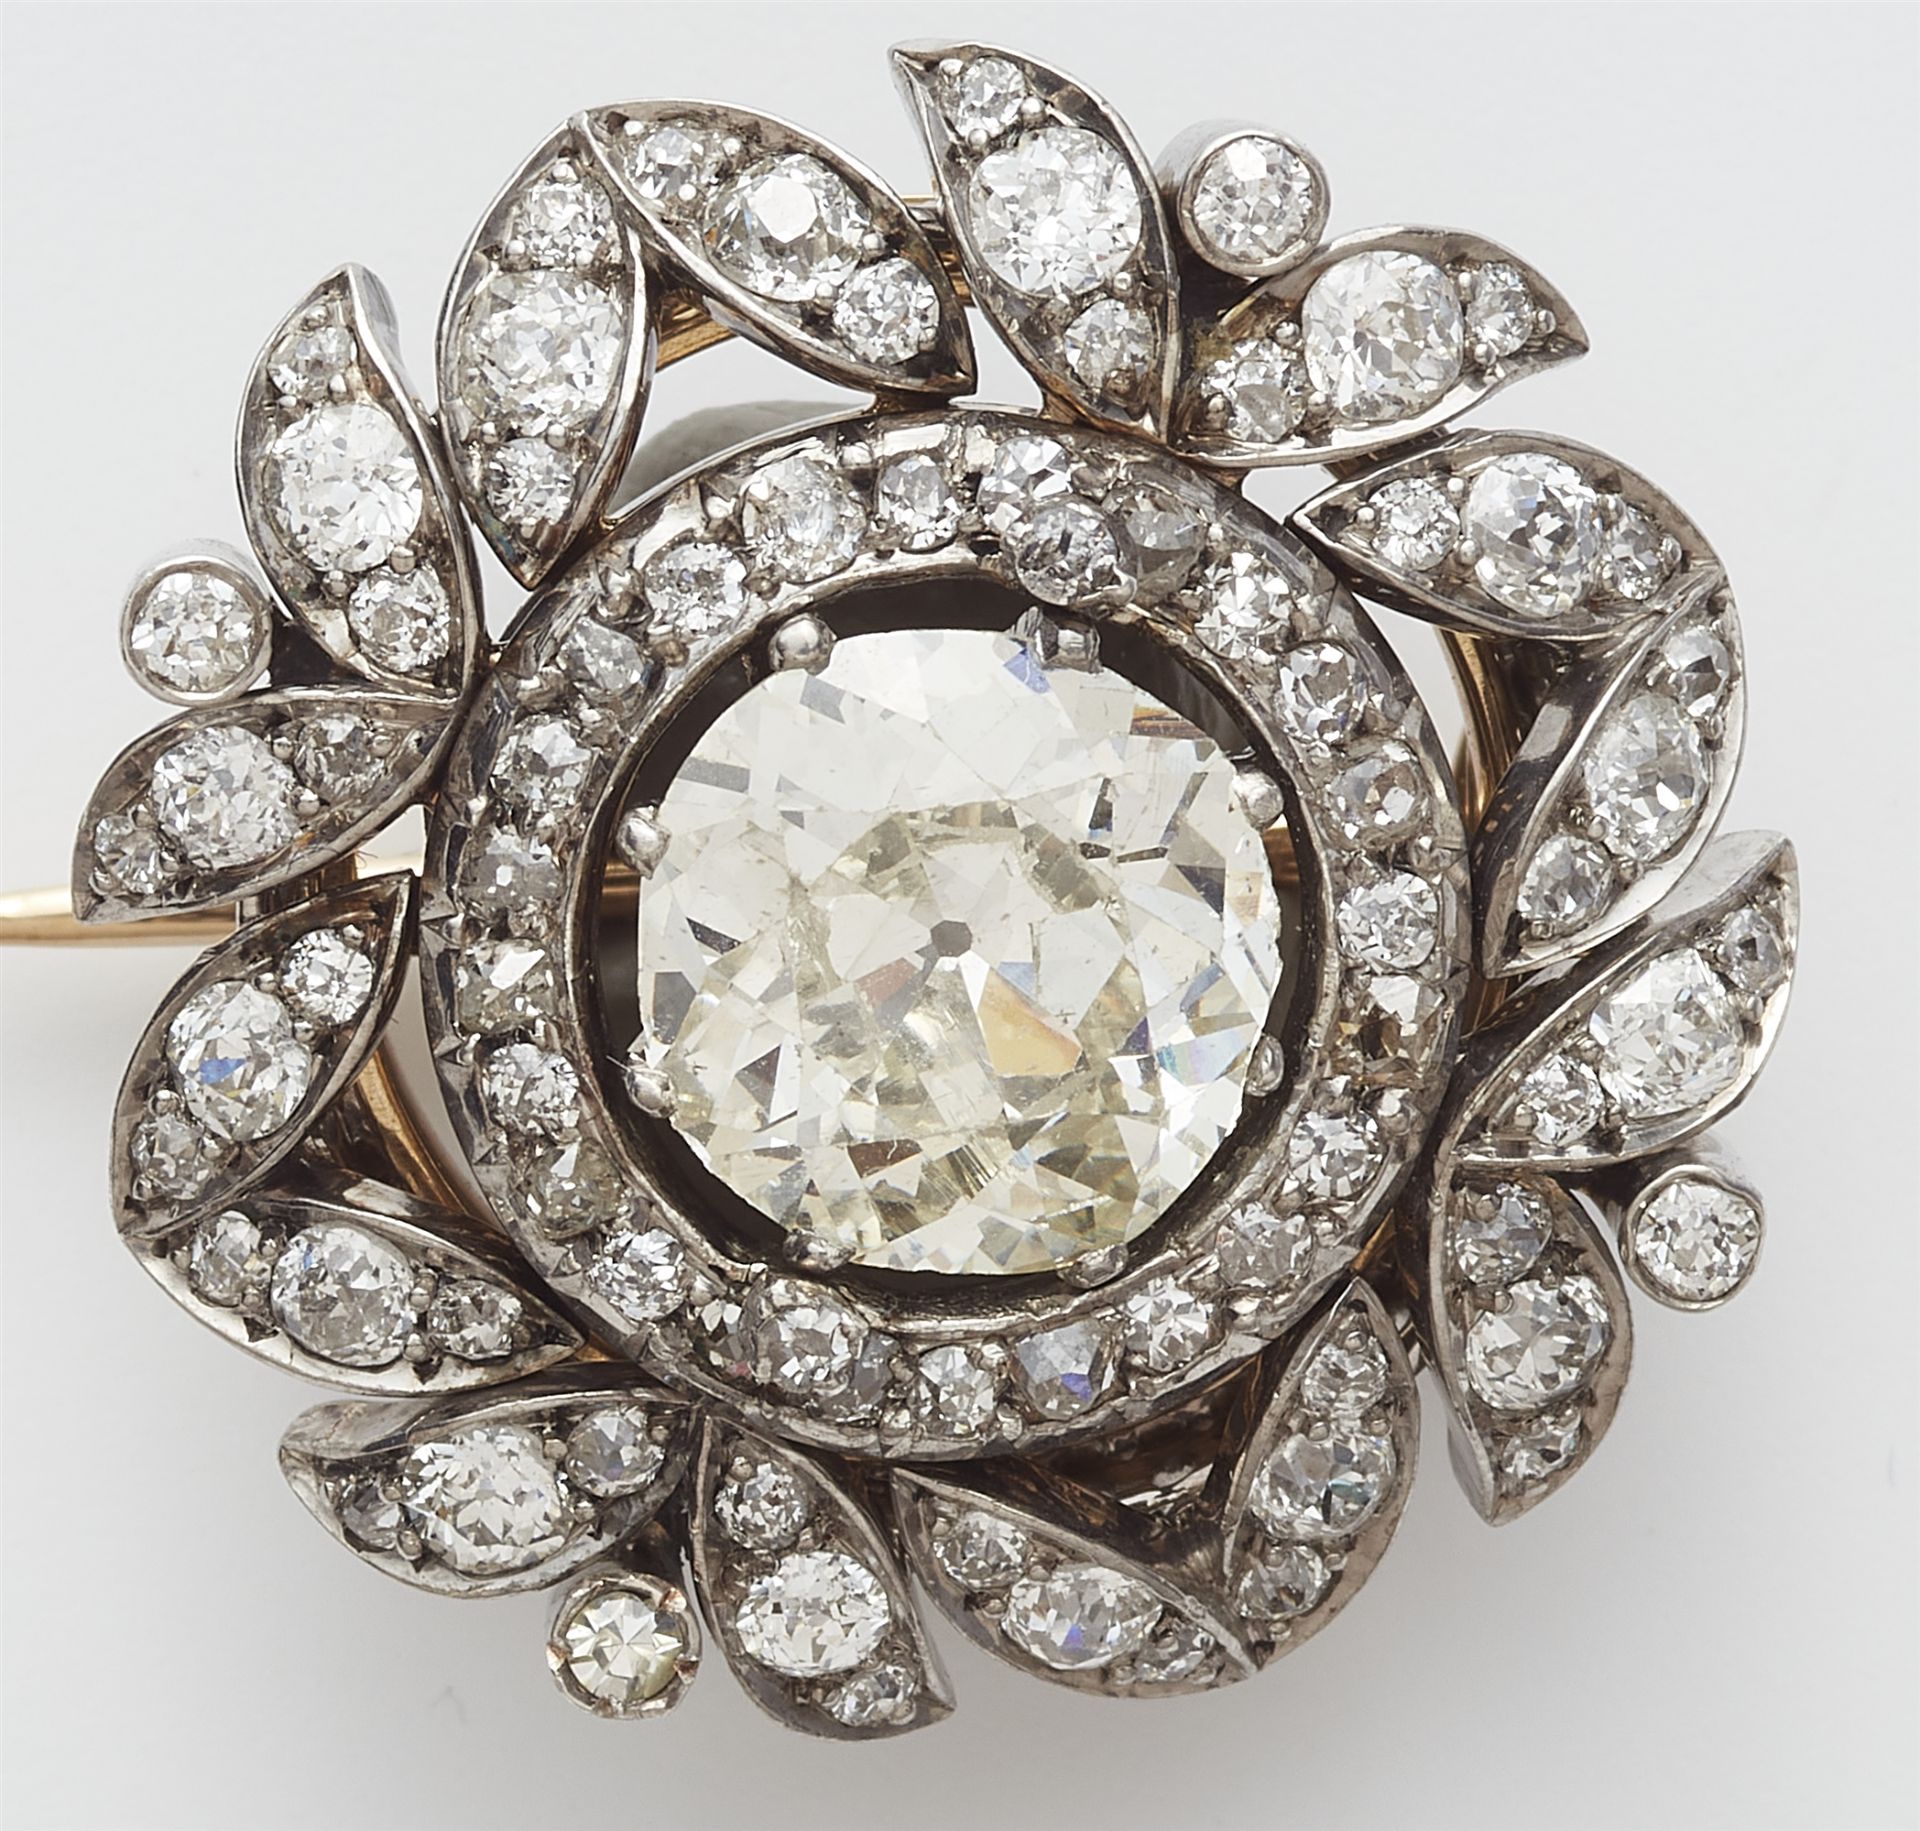 A Viennese 14k gold diamond brooch with a ca. 3.23 ct European old-cut centre stone. - Image 2 of 4